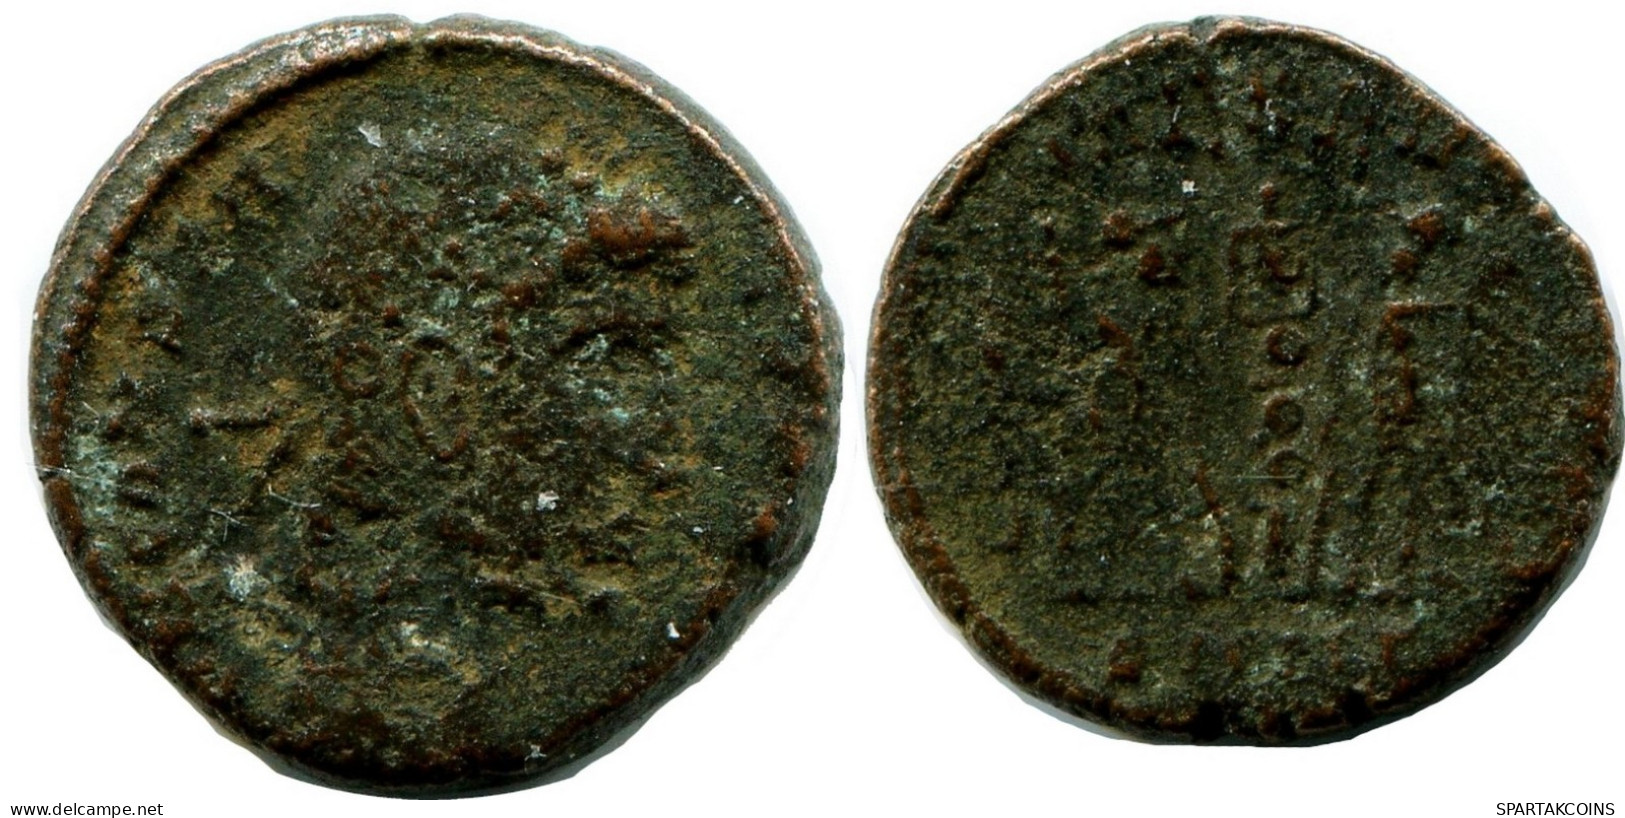 CONSTANS MINTED IN HERACLEA FROM THE ROYAL ONTARIO MUSEUM #ANC11562.14.U.A - Der Christlischen Kaiser (307 / 363)